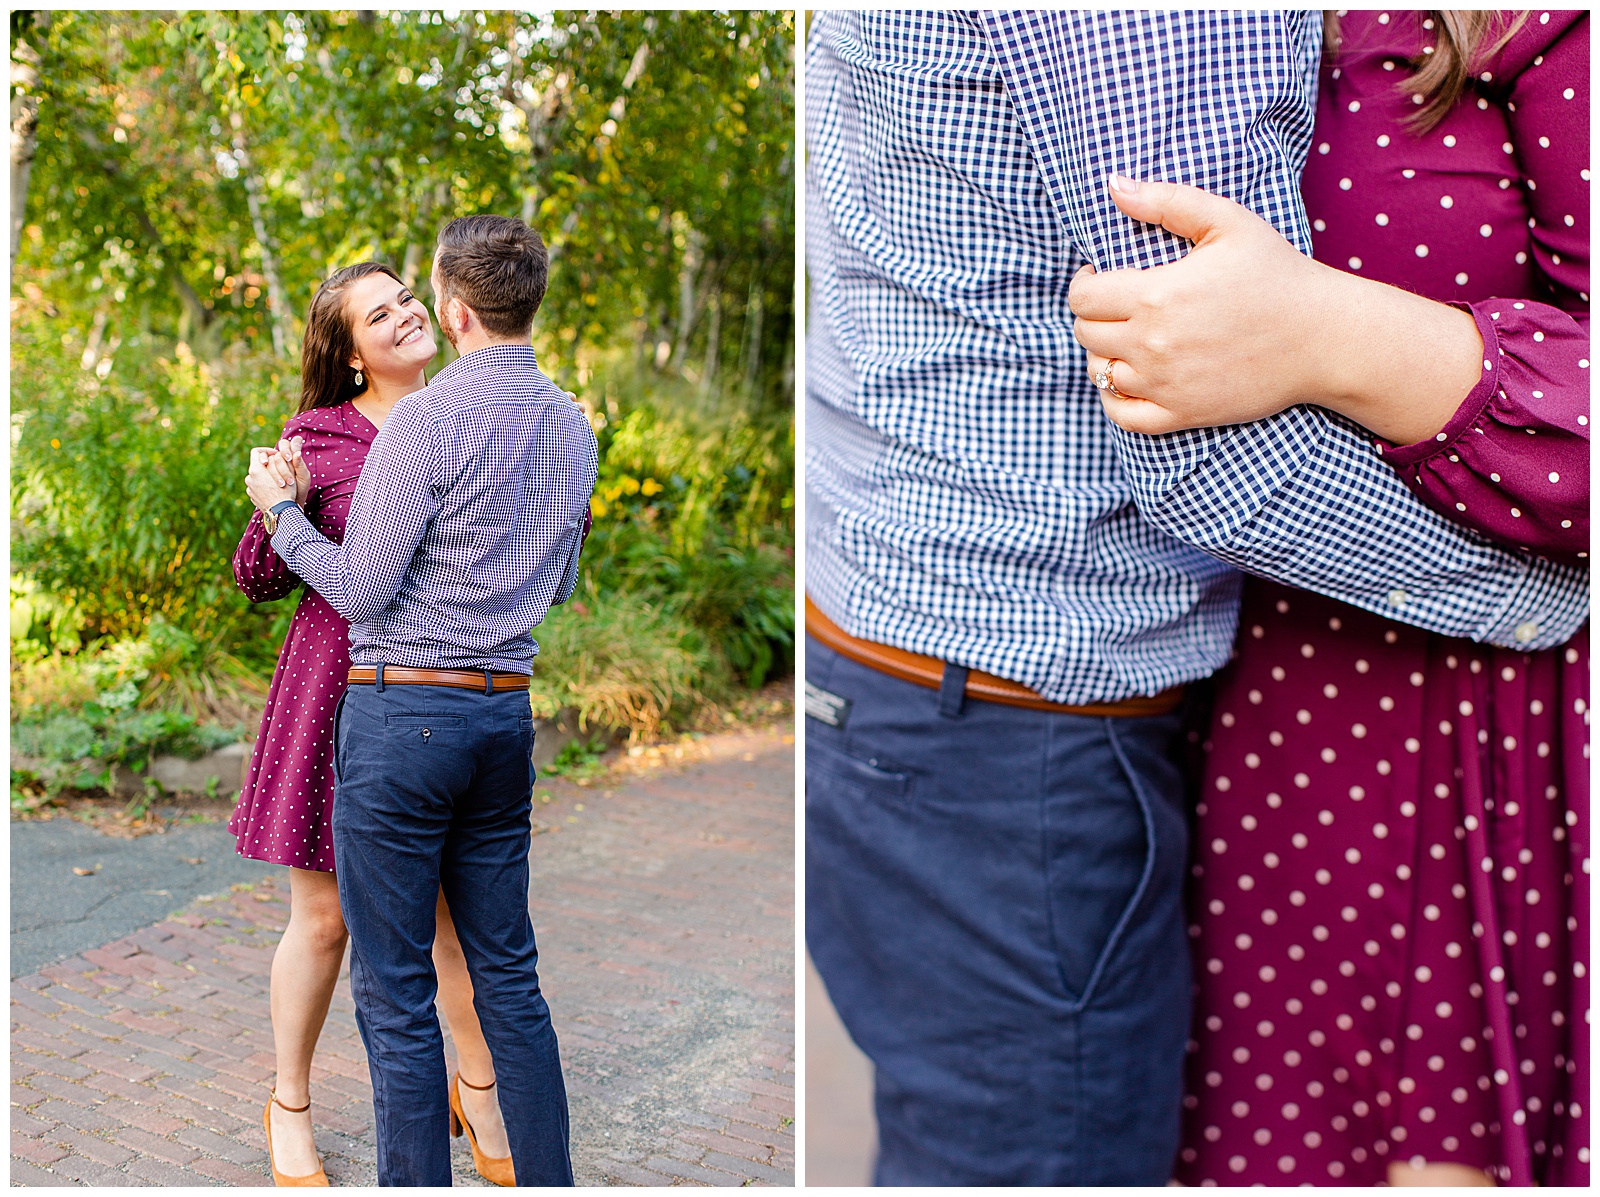 Burgundy and navy summer engagement session at the Cathedral of St. Paul, MN.